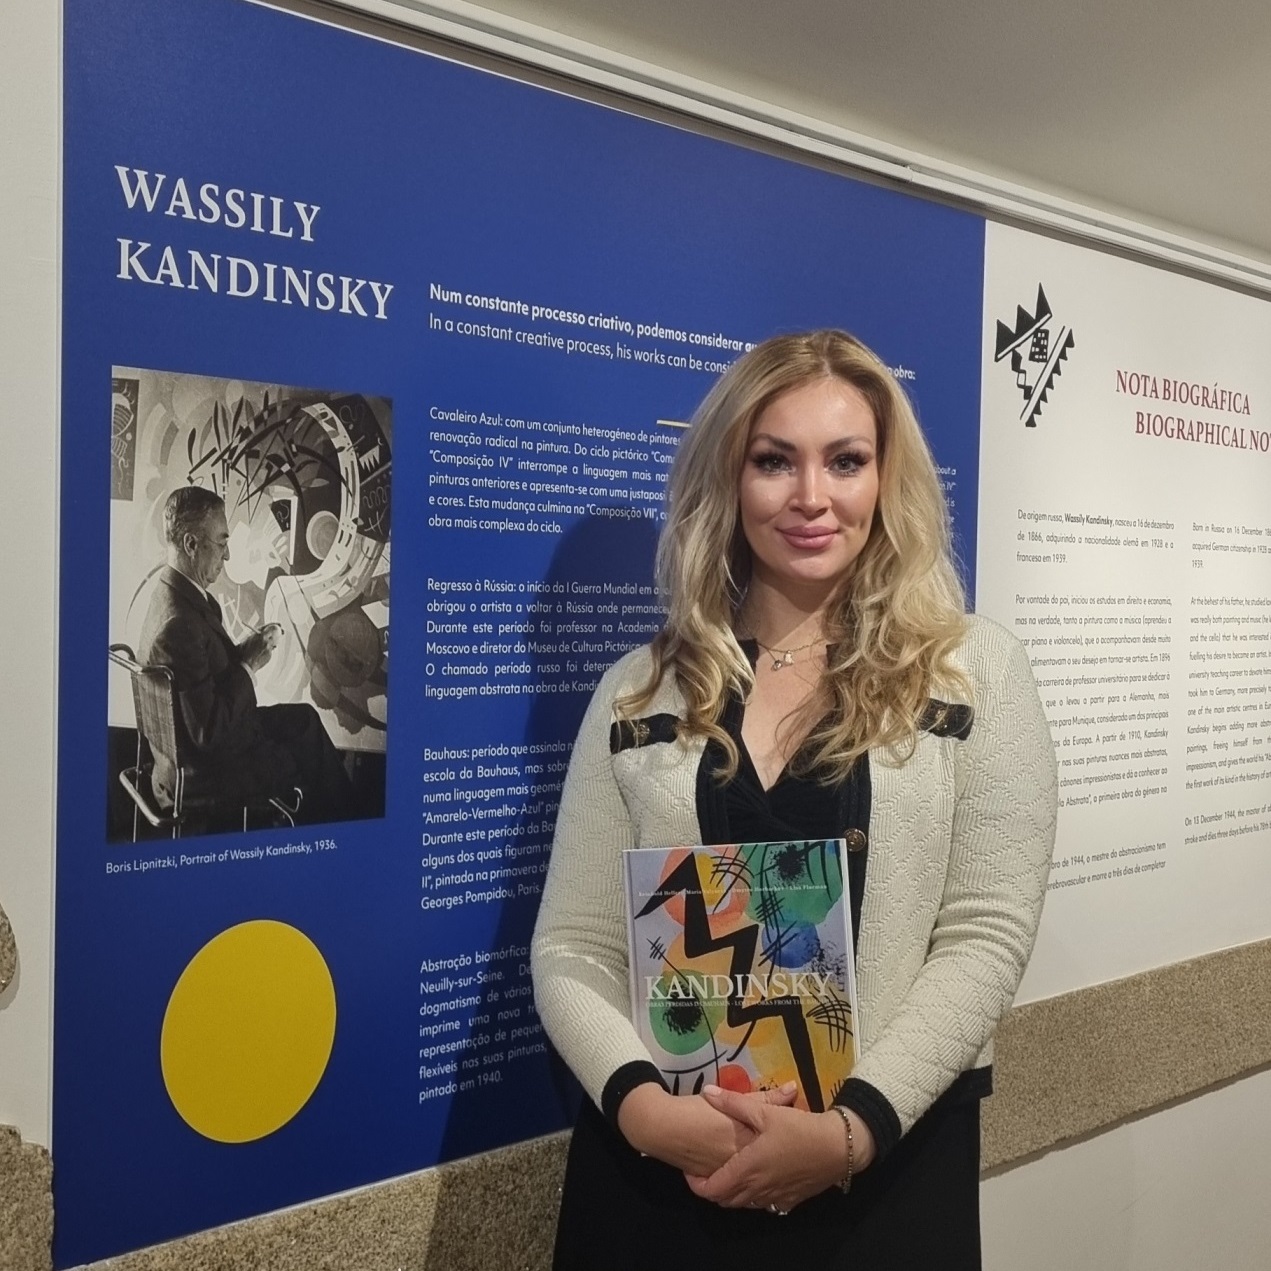 The New Wassily Kandinsky Exhibition Opened in Porto, Portugal